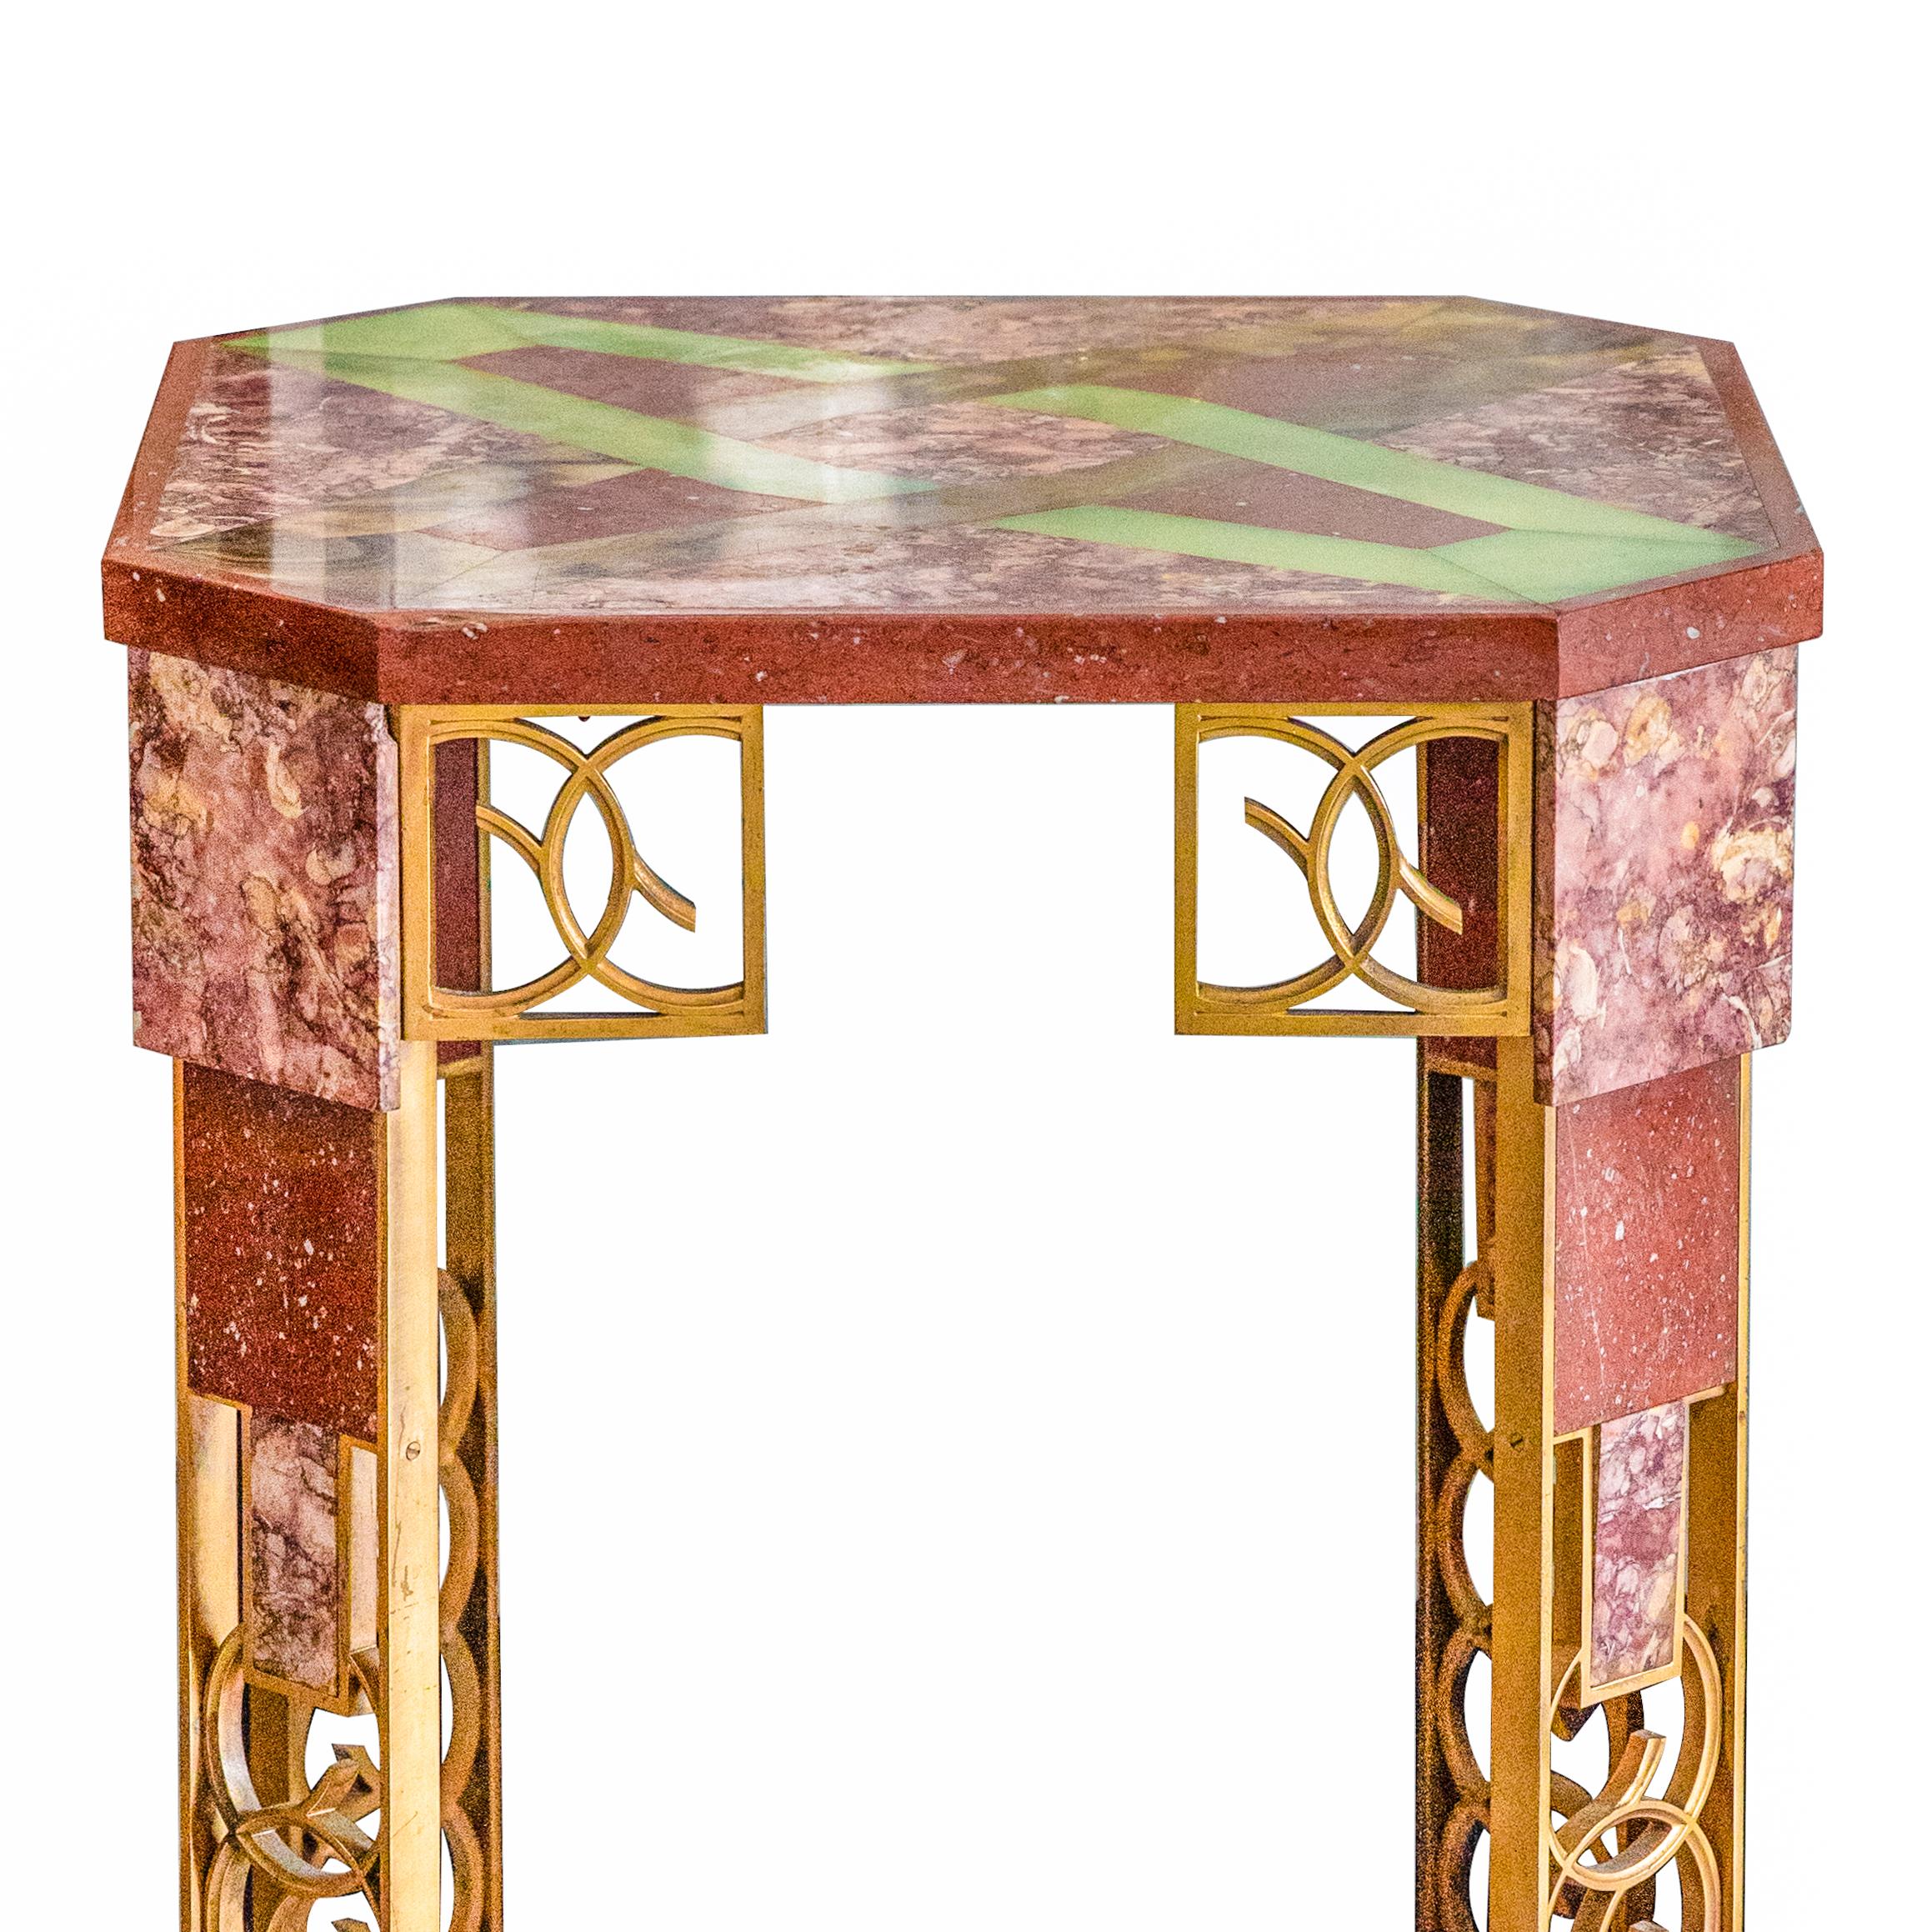 Offered is a marble, onyx, and gilt-bronze side table from the Collection of Walter P. Chrysler, Jr., France, circa 1925, the square marble top with cut corners inset in onyx with a pattern of interlocking devices, raised on angled legs composed of